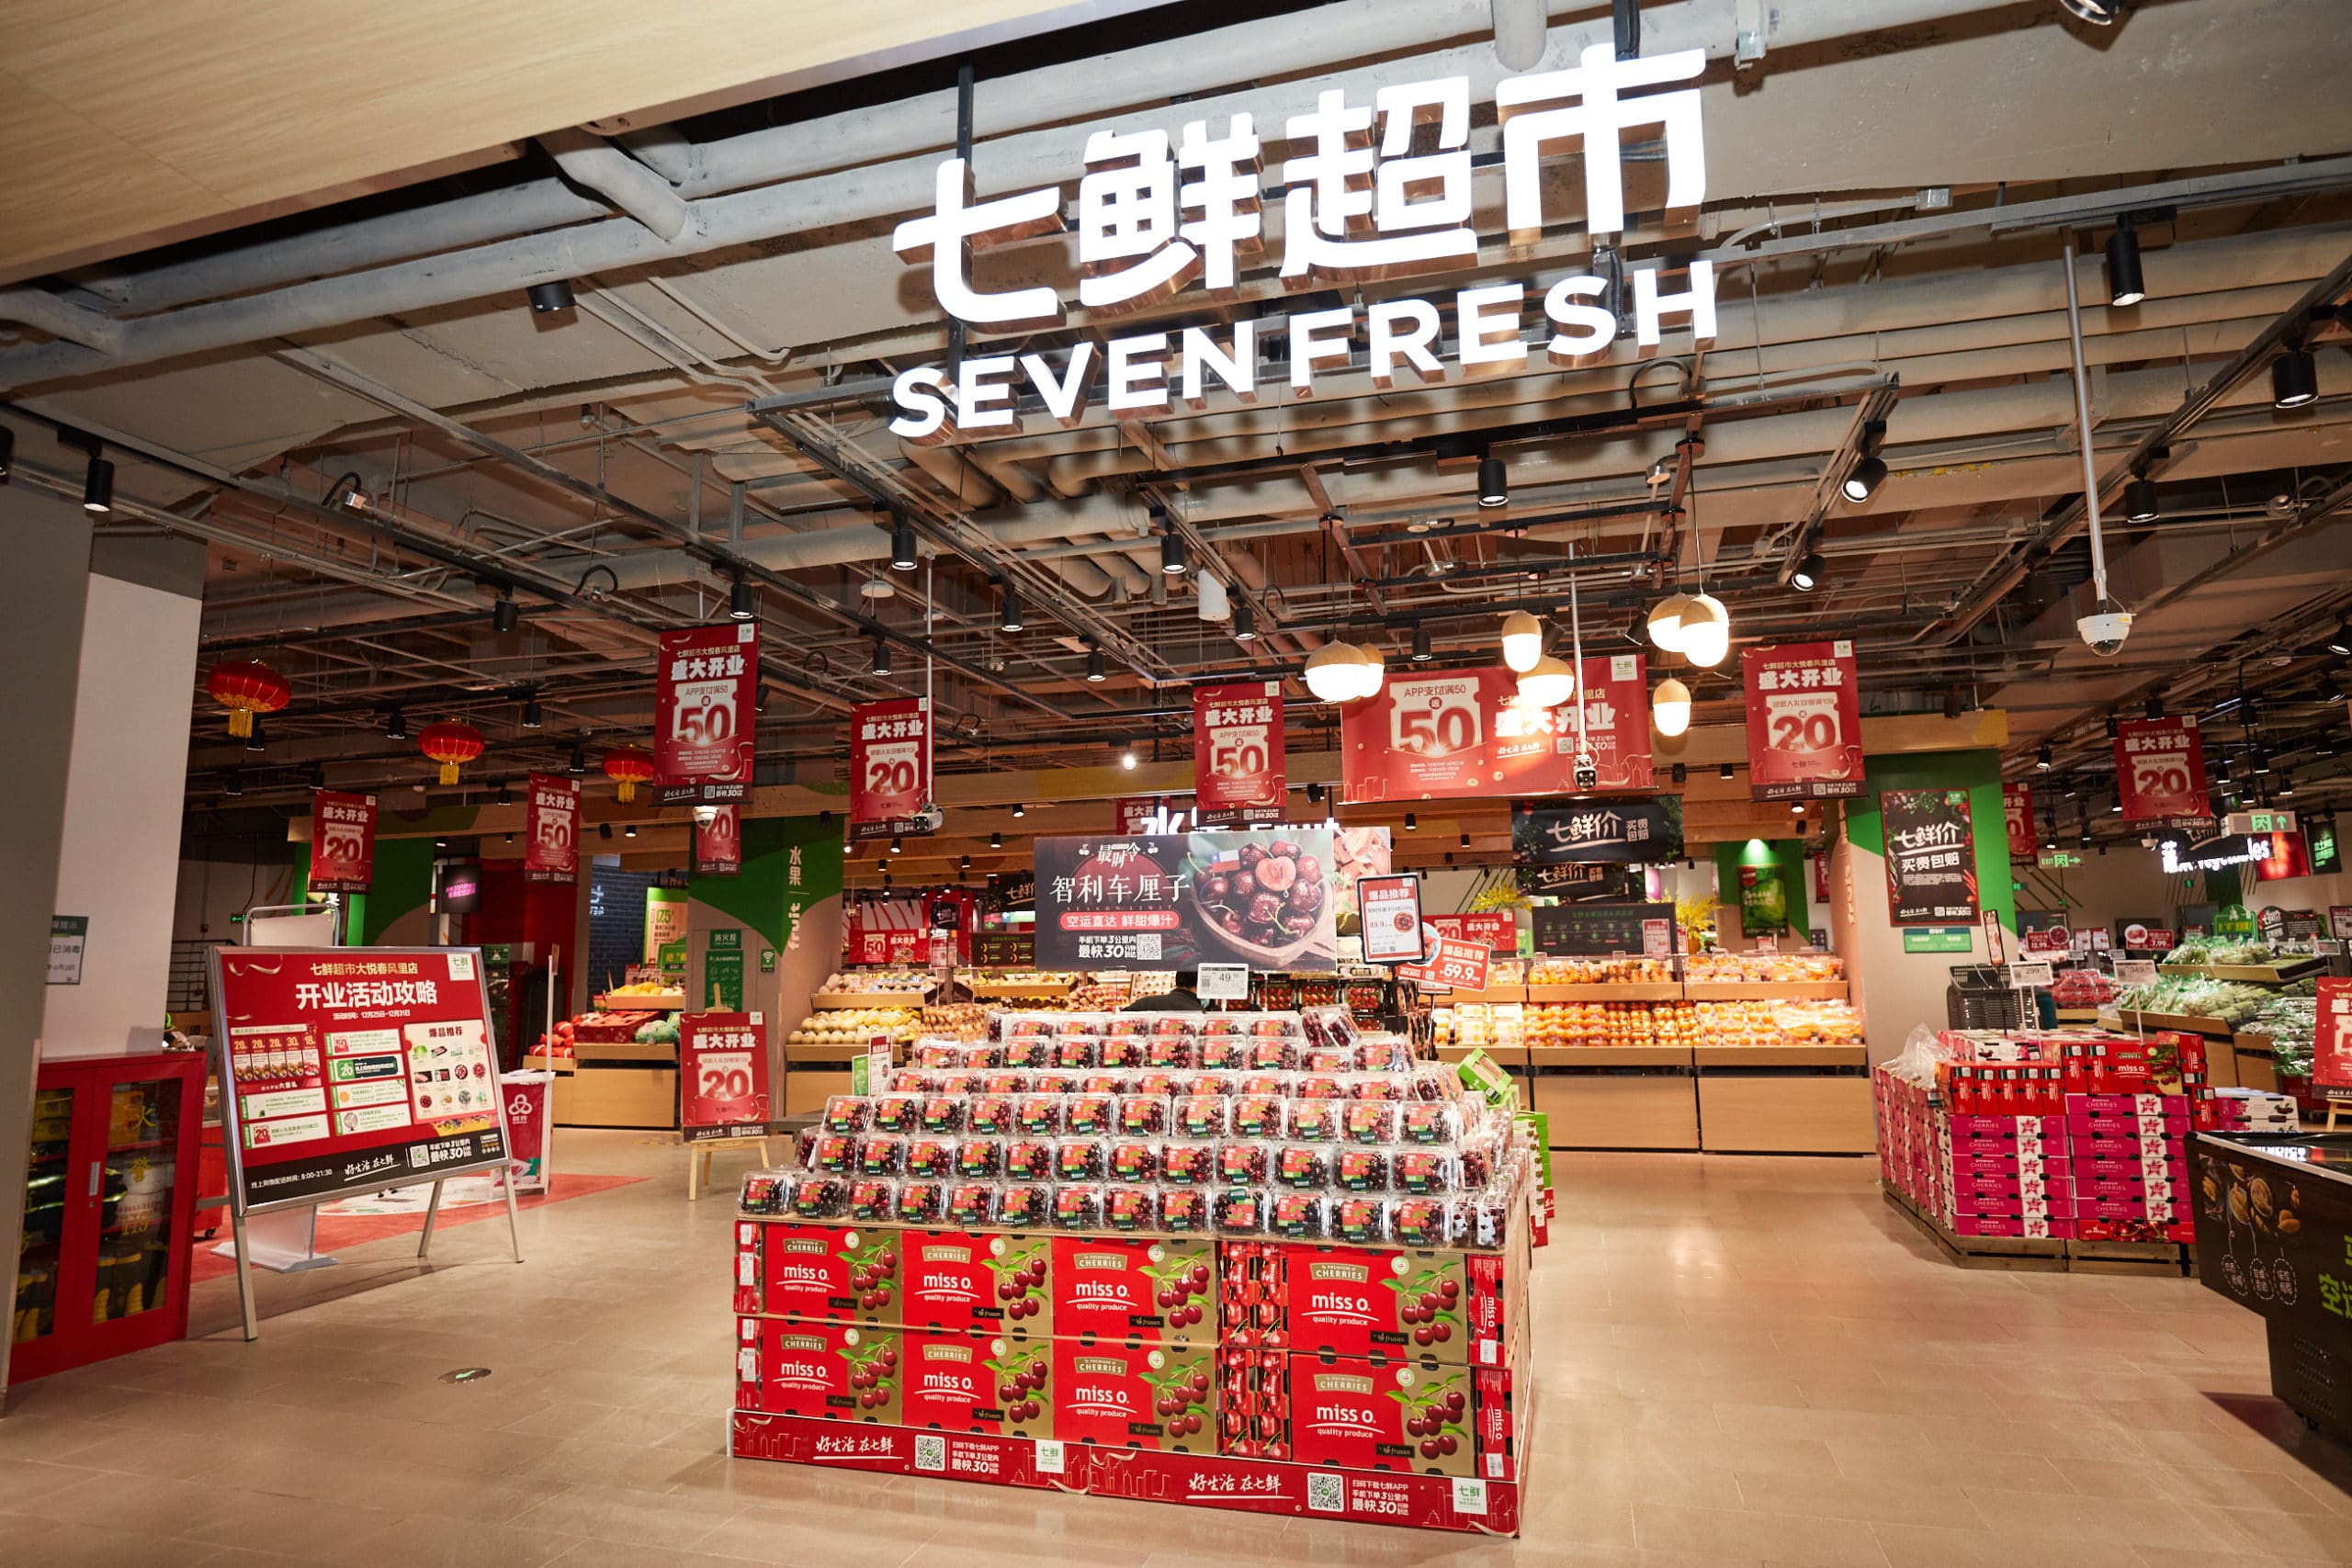 Newly Opened SEVEN FRESH Store in Beijing Includes Two Experiential Areas